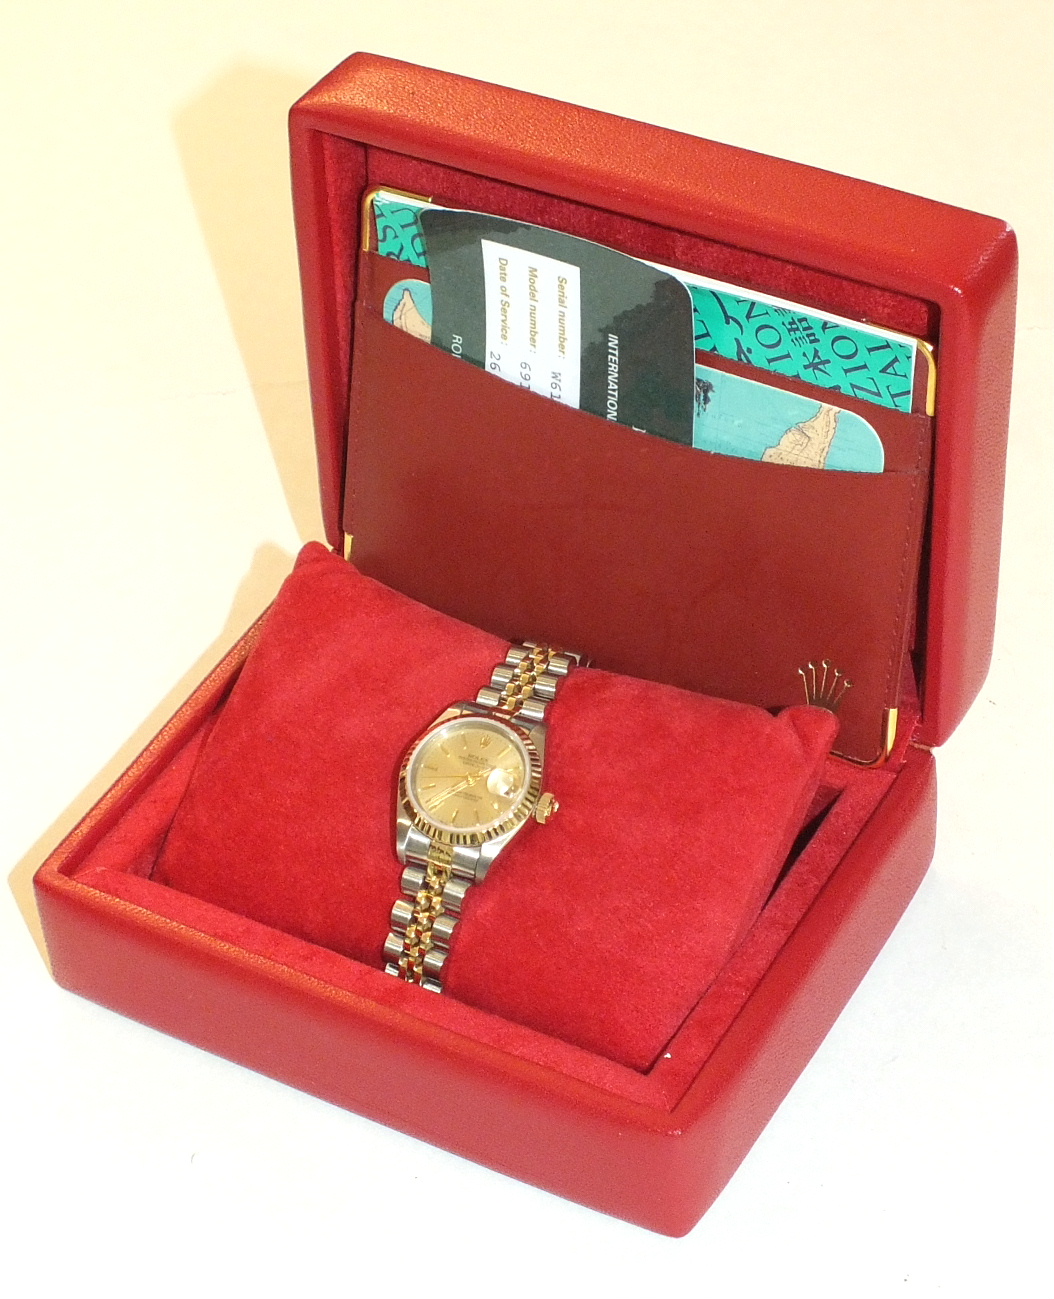 Rolex, Oyster Perpetual Datejust chronometer ladies wrist watch, the gold dial with baton markers, - Image 2 of 2